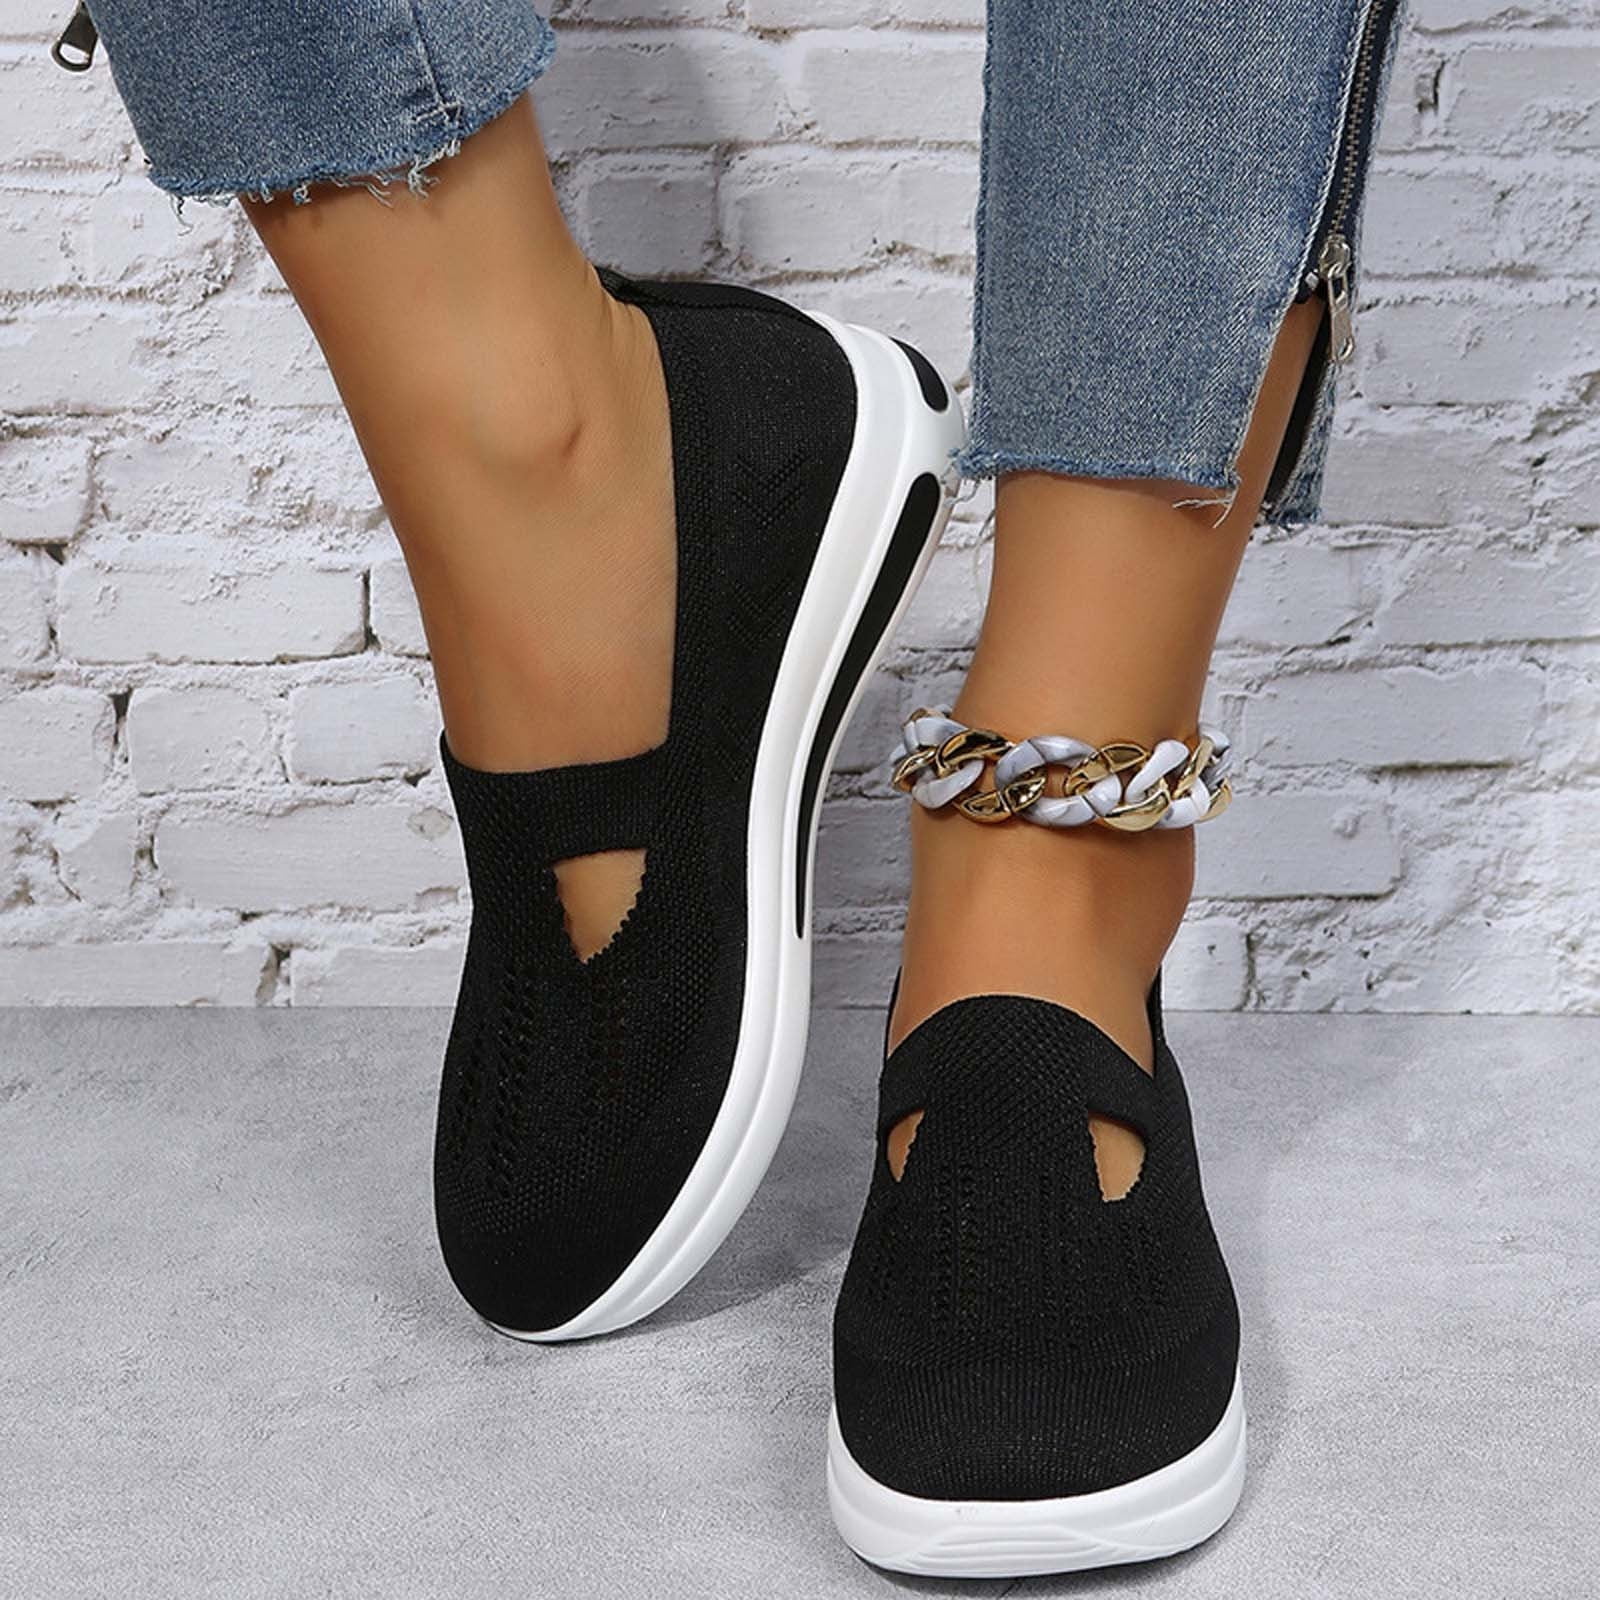 Large Size Rocking Shoes Women s Shoes Slip on Casual Shoes Thick Bottom Breathable Mother Shoes Sneakers fa326c50 f79c 4514 a61d 360c50c0fc06.4176371baff90905e3831570e232929b